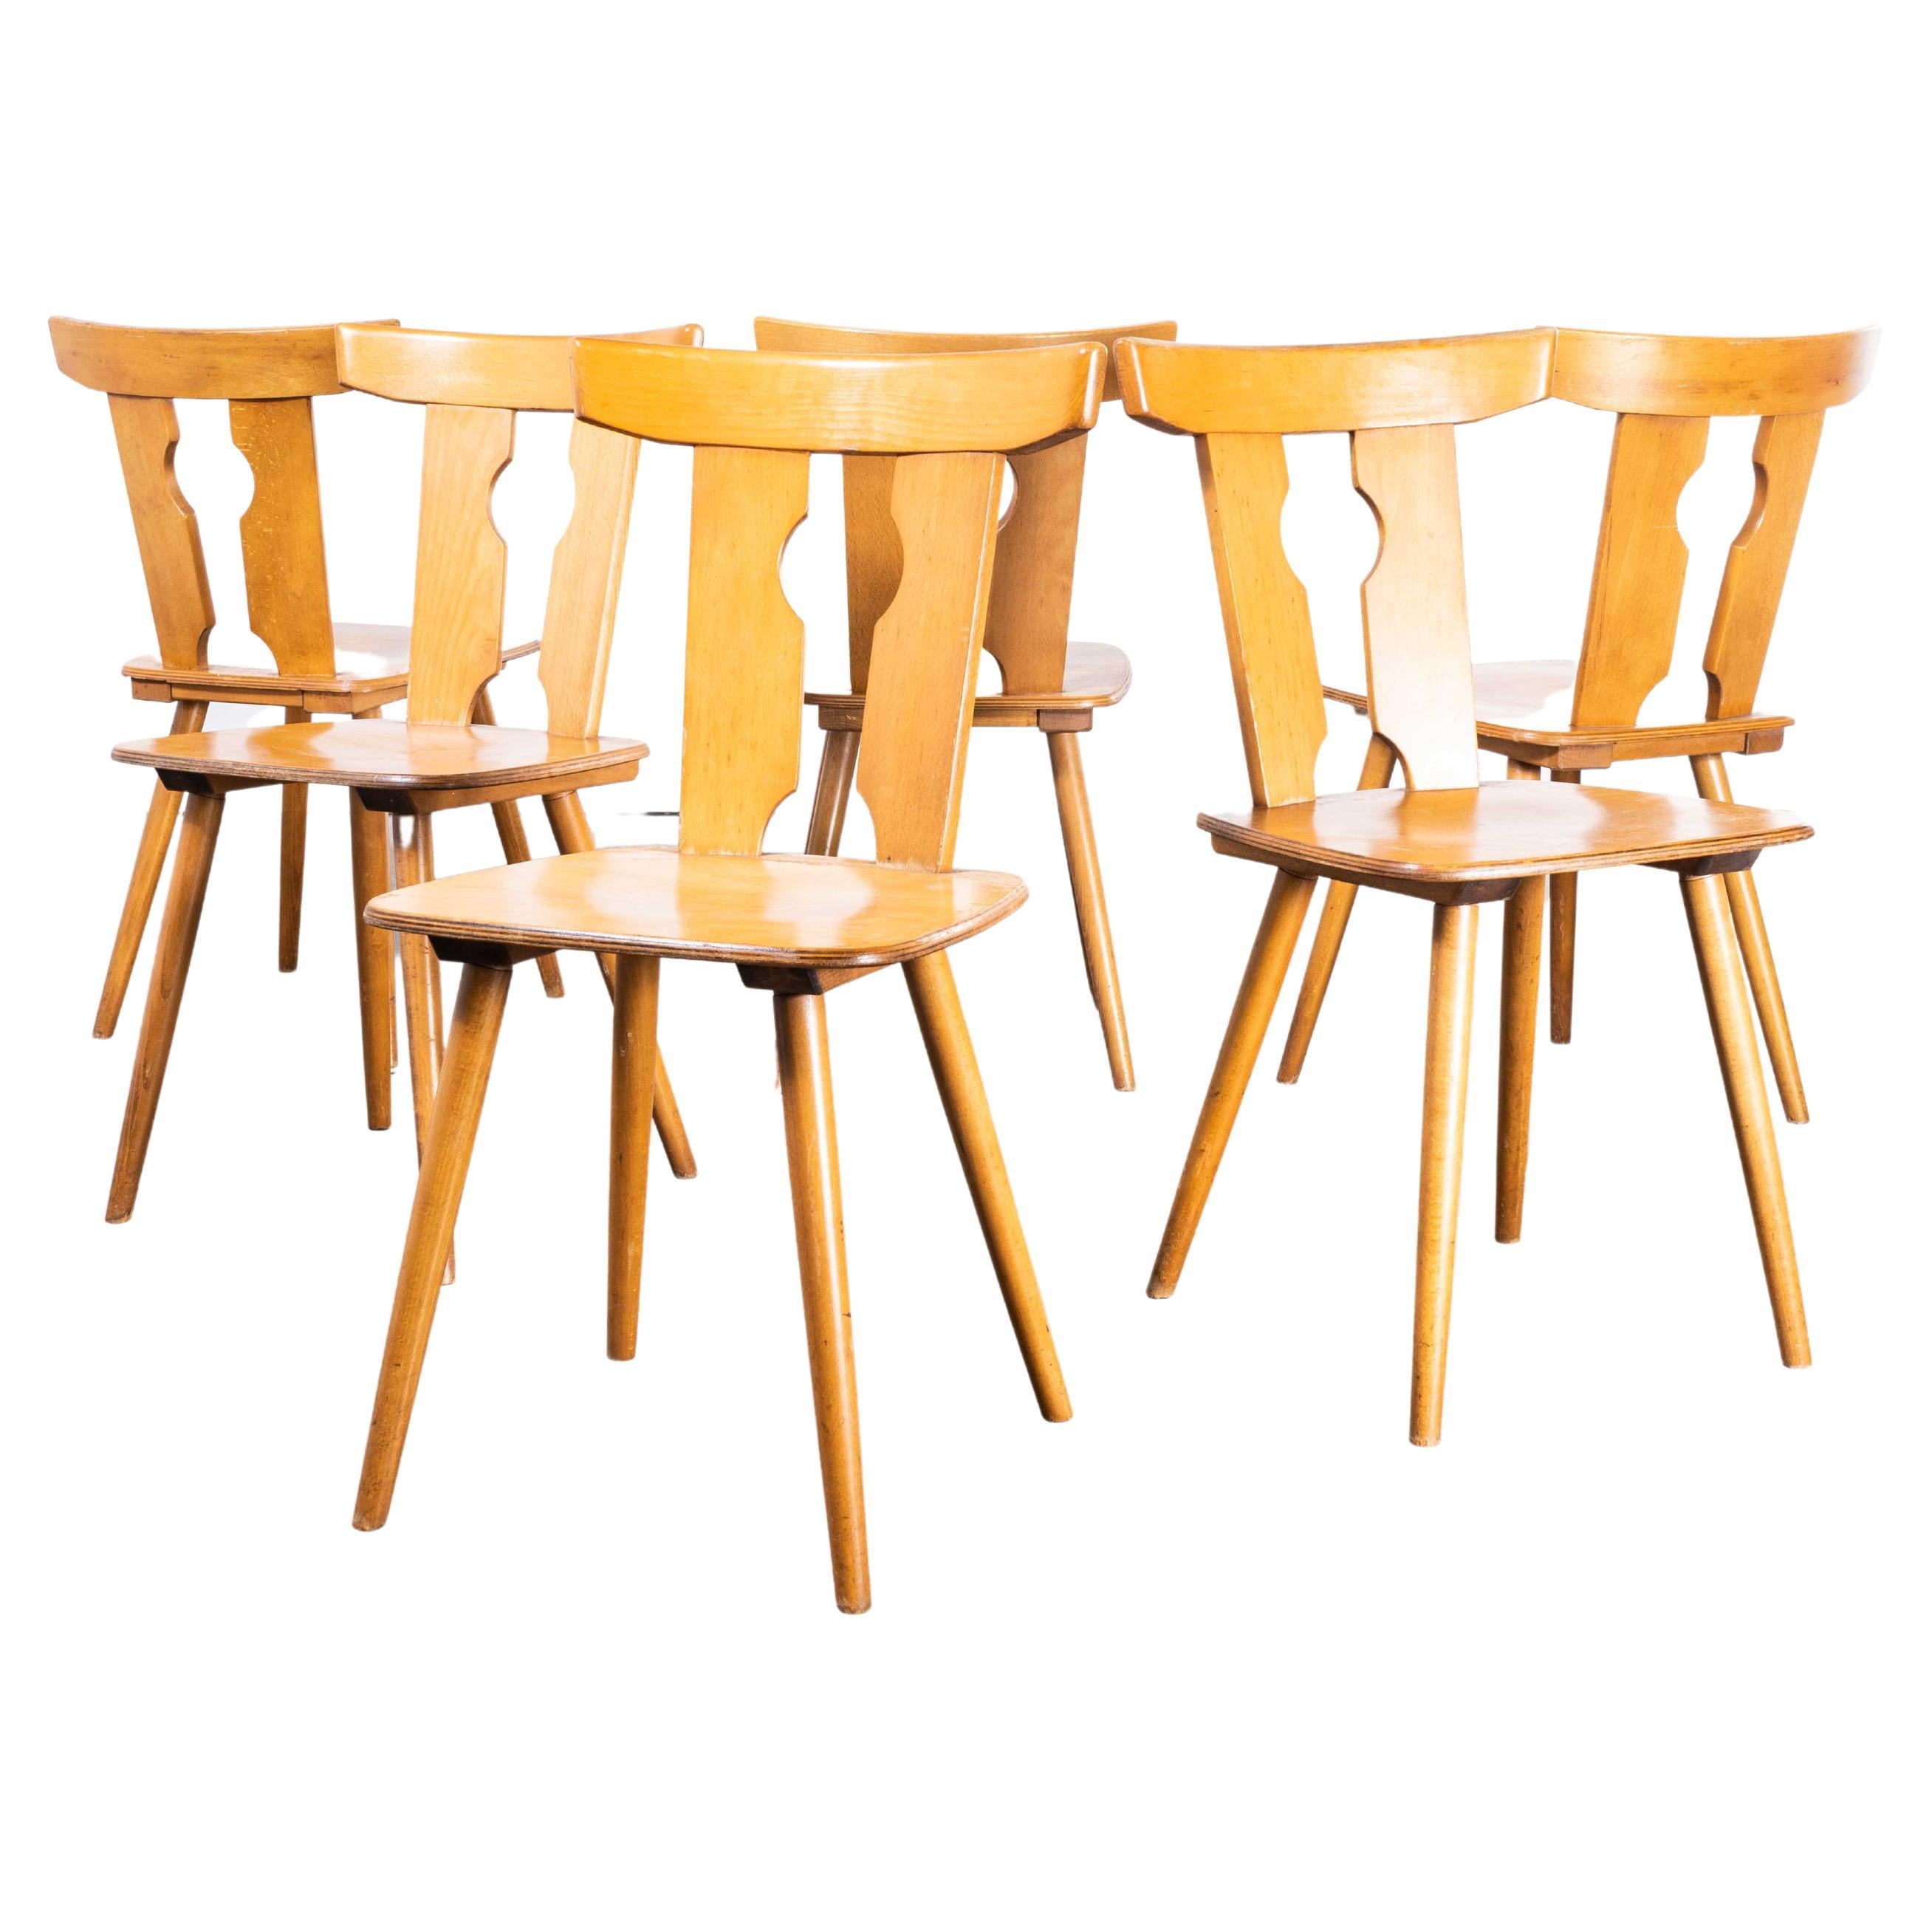 1950's Alsace Regional Blonde Dining Chair - Set Of Six